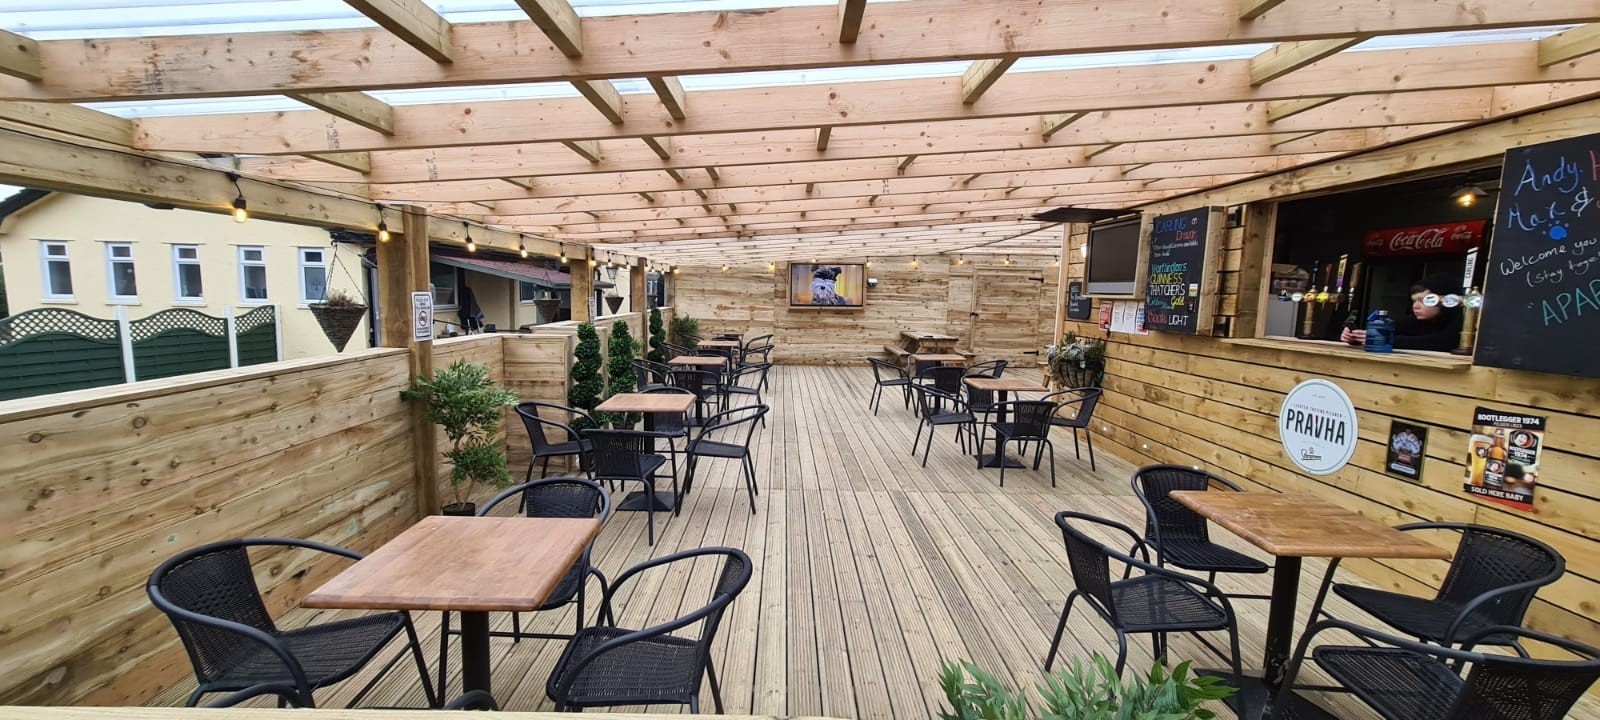 The new outside area at the Burntwood in Drury